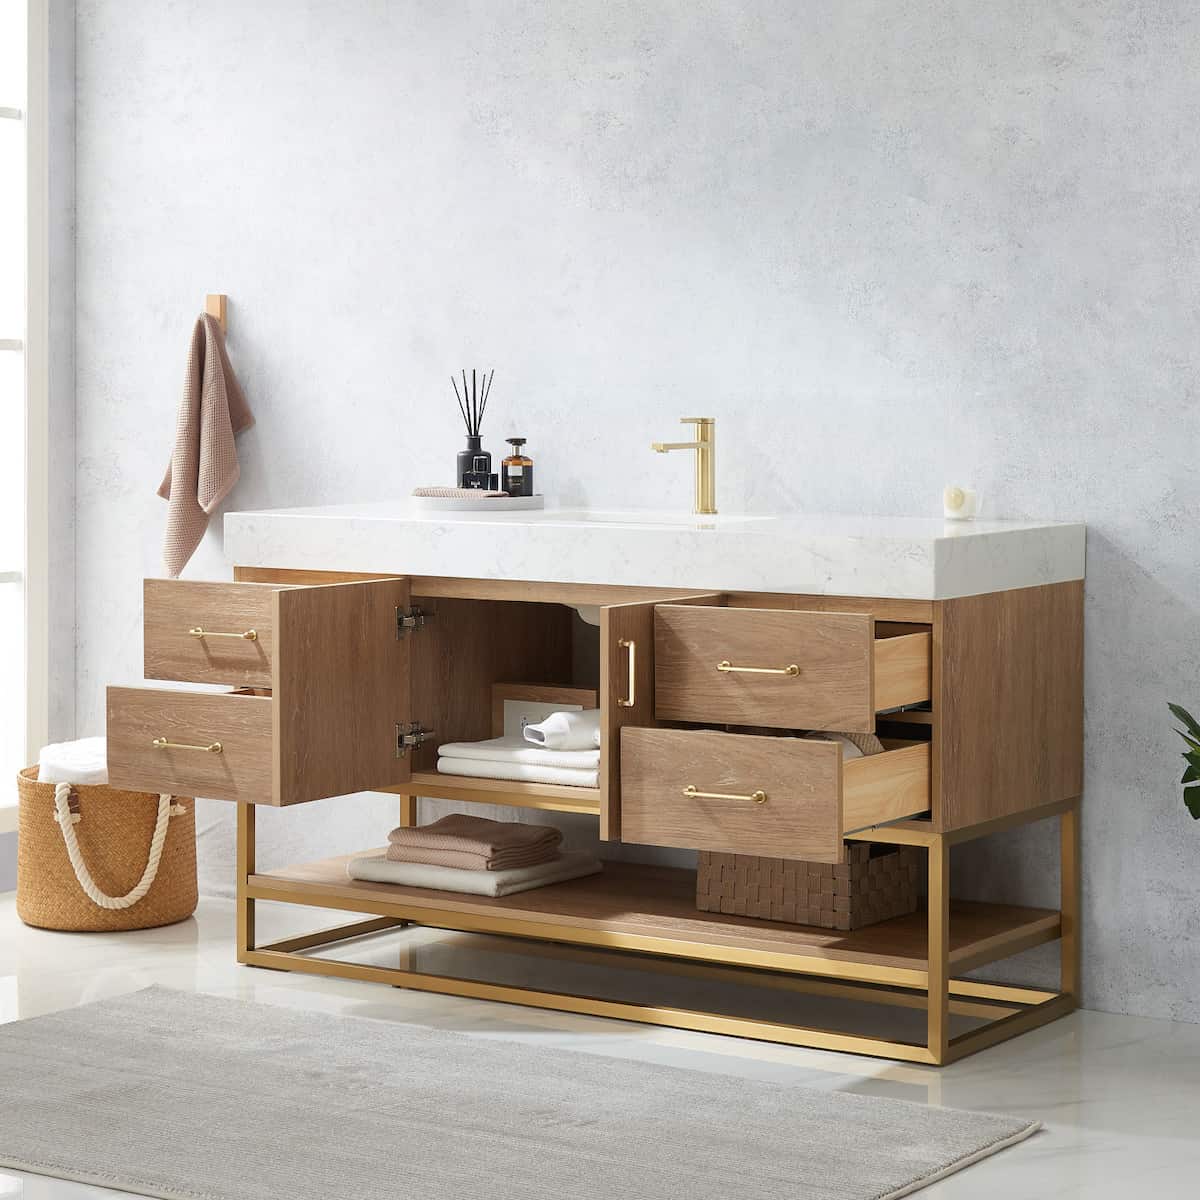 Vinnova Alistair 60 Inch Freestanding Single Vanity in North American Oak and Brushed Gold Frame with White Grain Stone Countertop Without Mirror Inside 789060S-NO-GW-NM